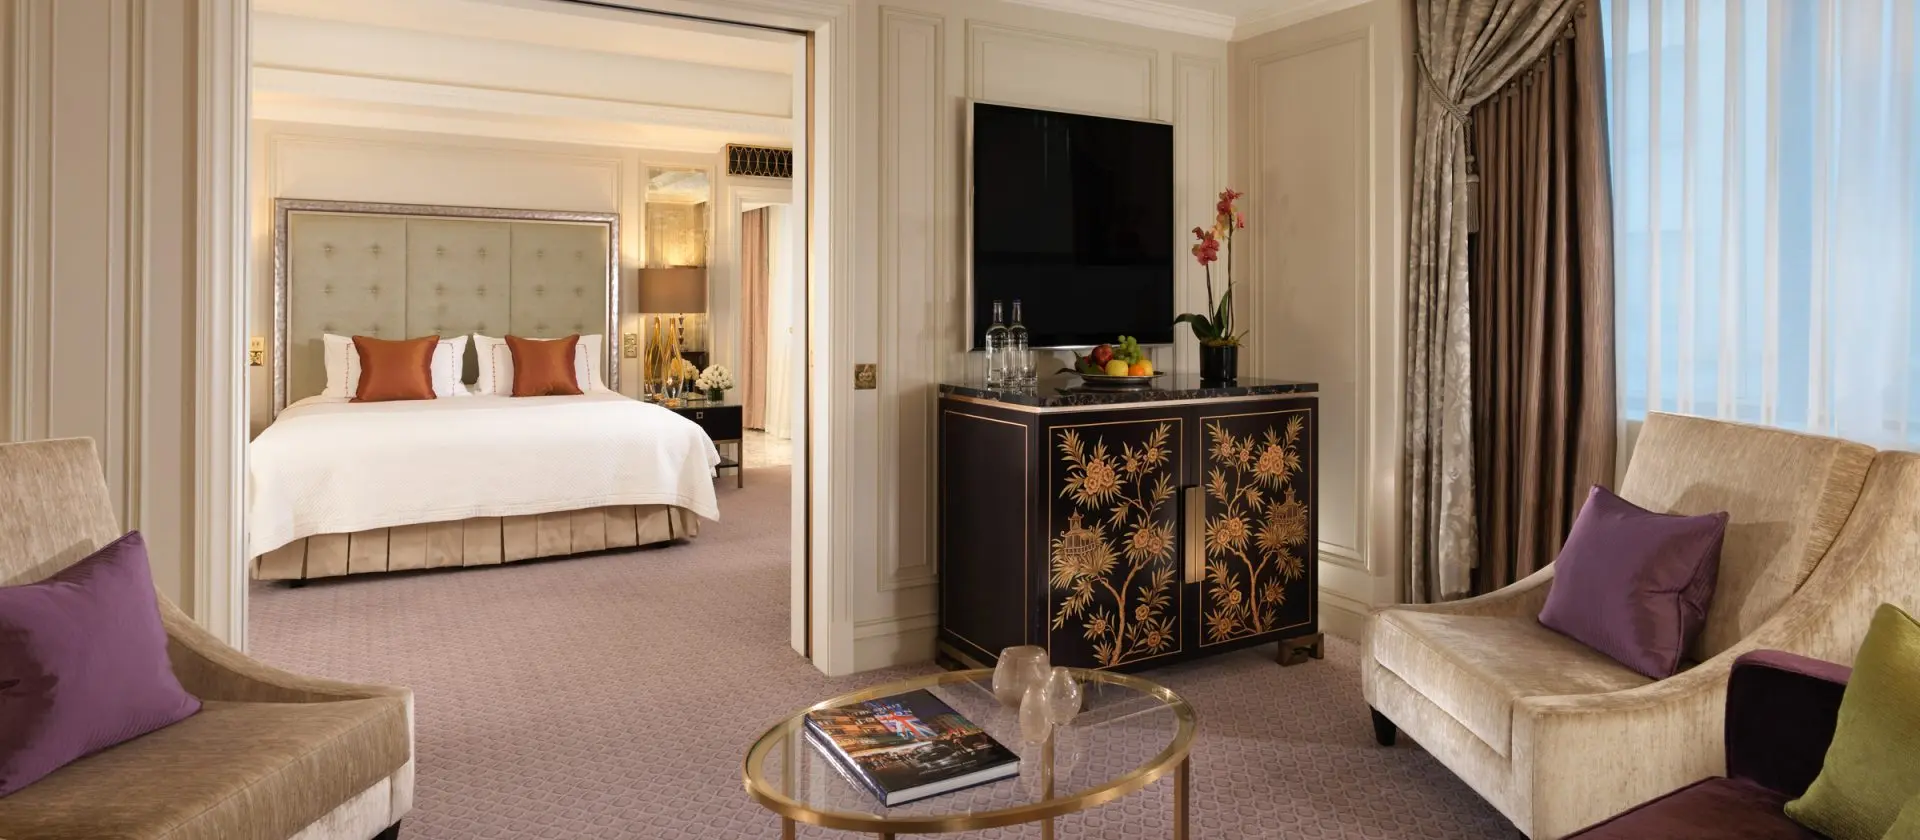 Hotel review Accommodation' - The Dorchester - Dorchester Collection - 0